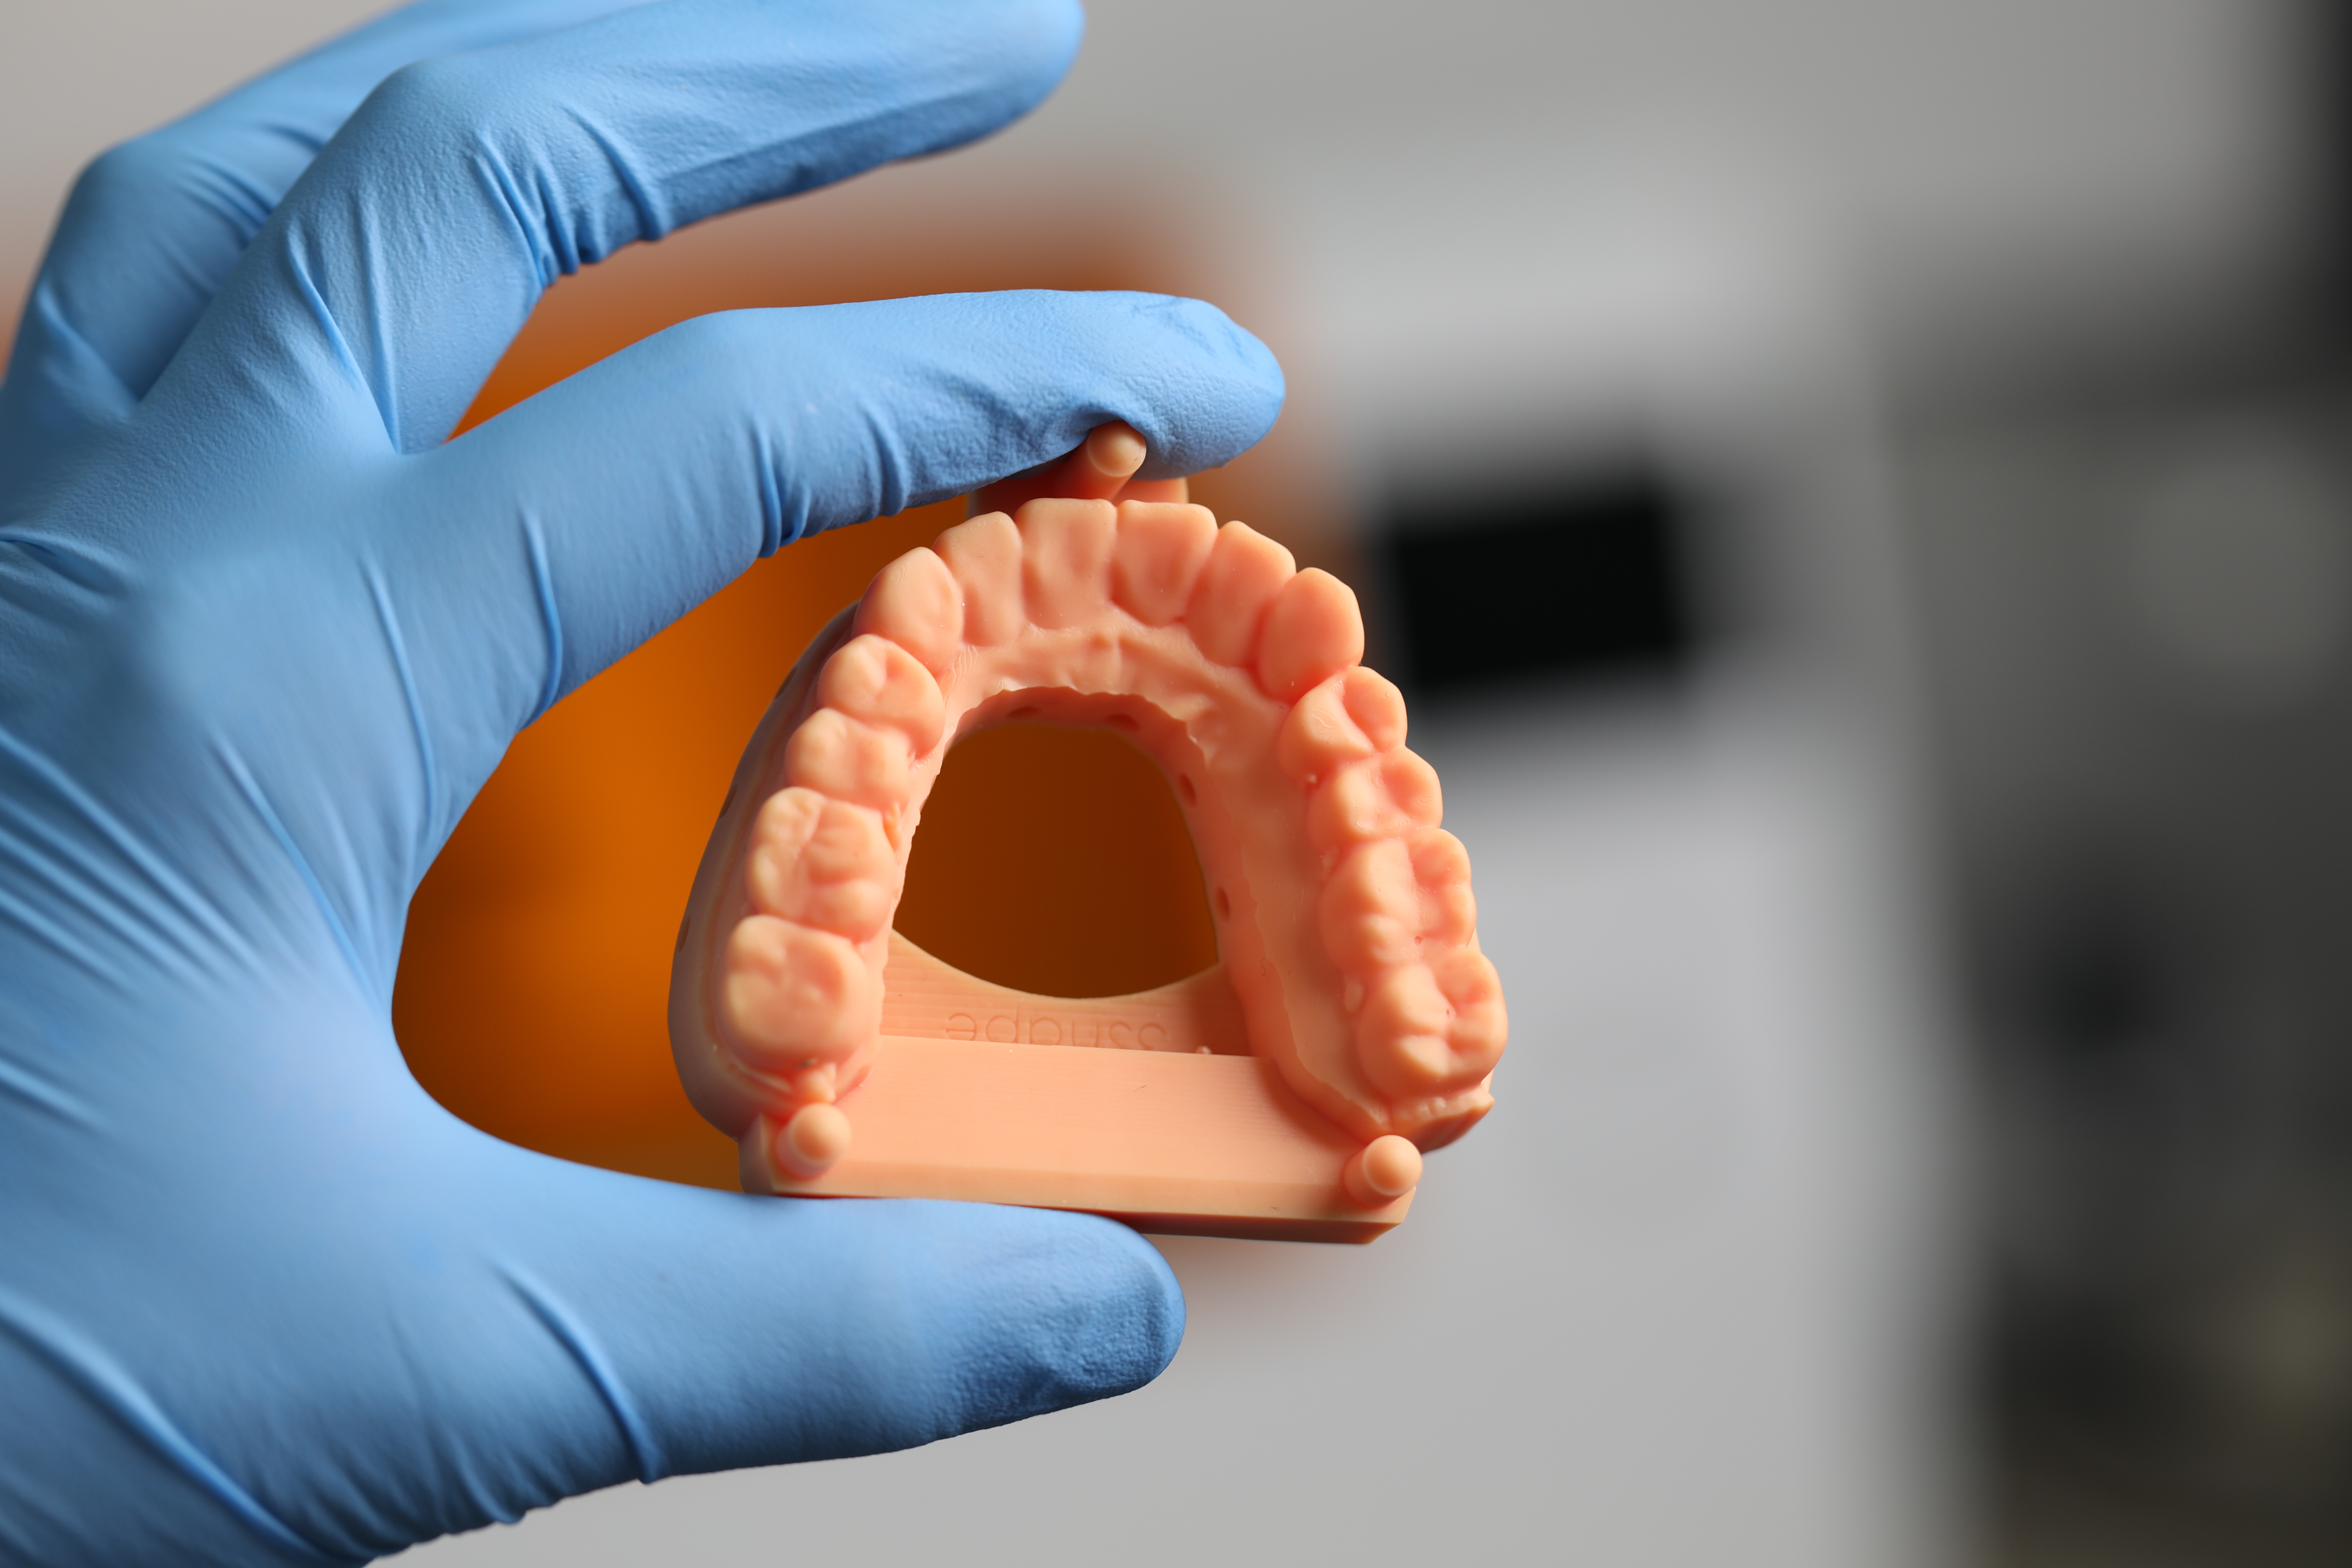 ACME launched a multi-material dental application 3D printer to meet the different needs of customers